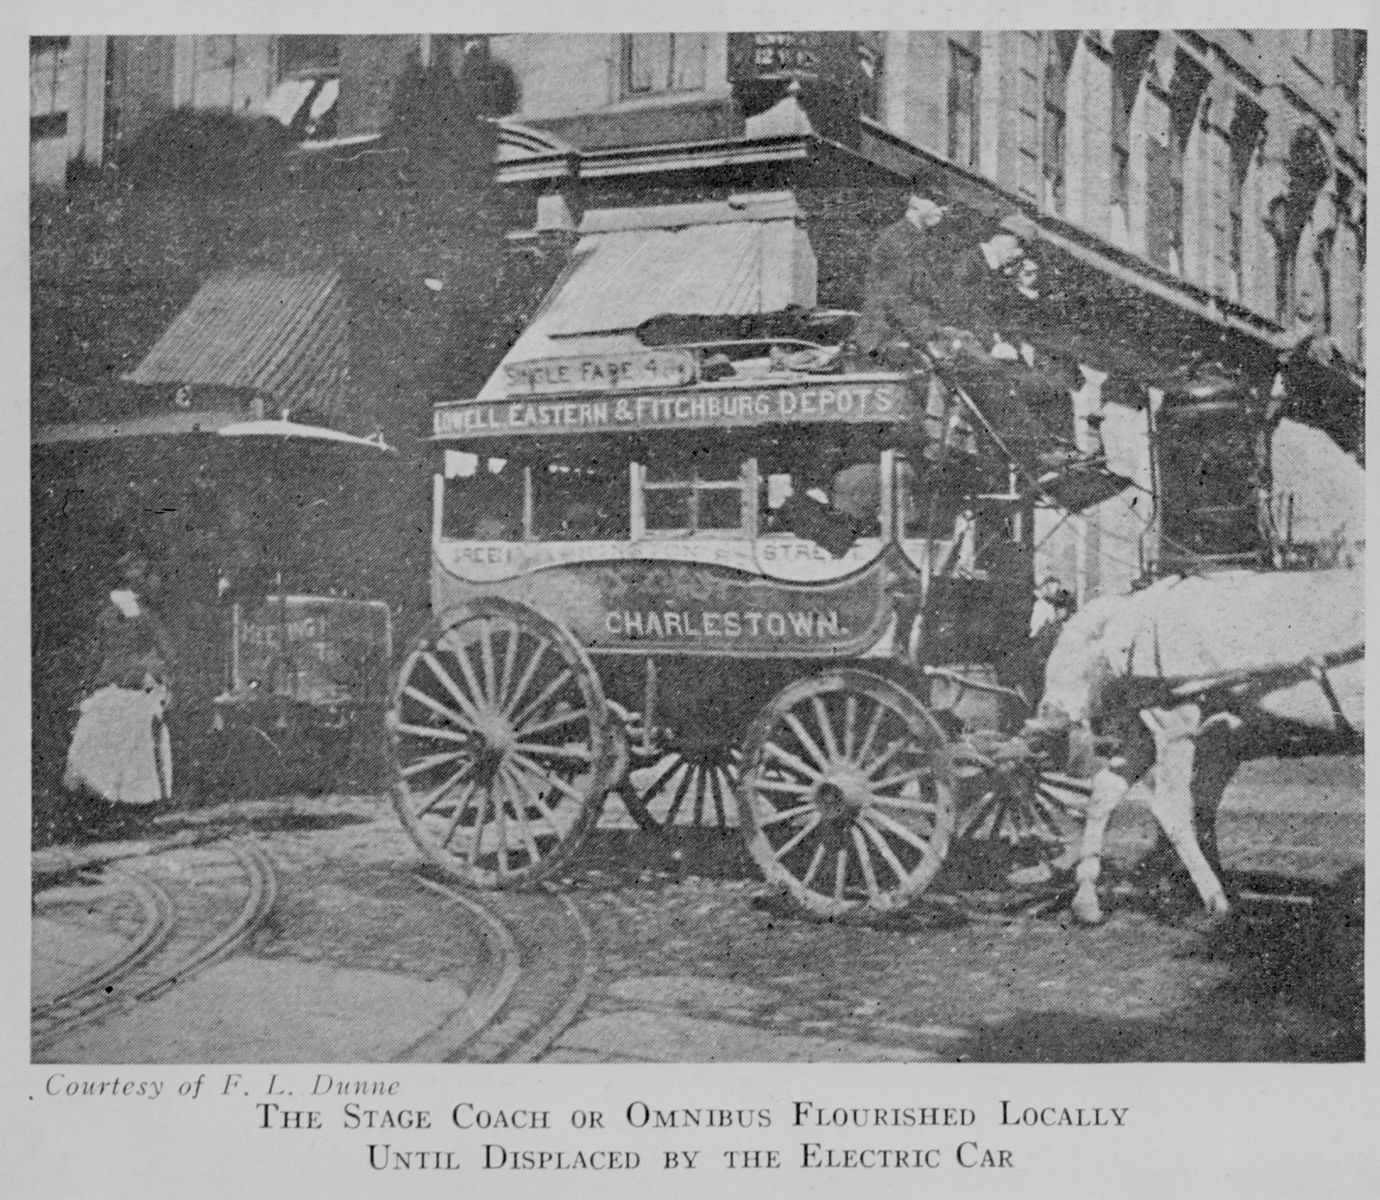 An image of a Charlestown stage coach, from the Boston Public Library